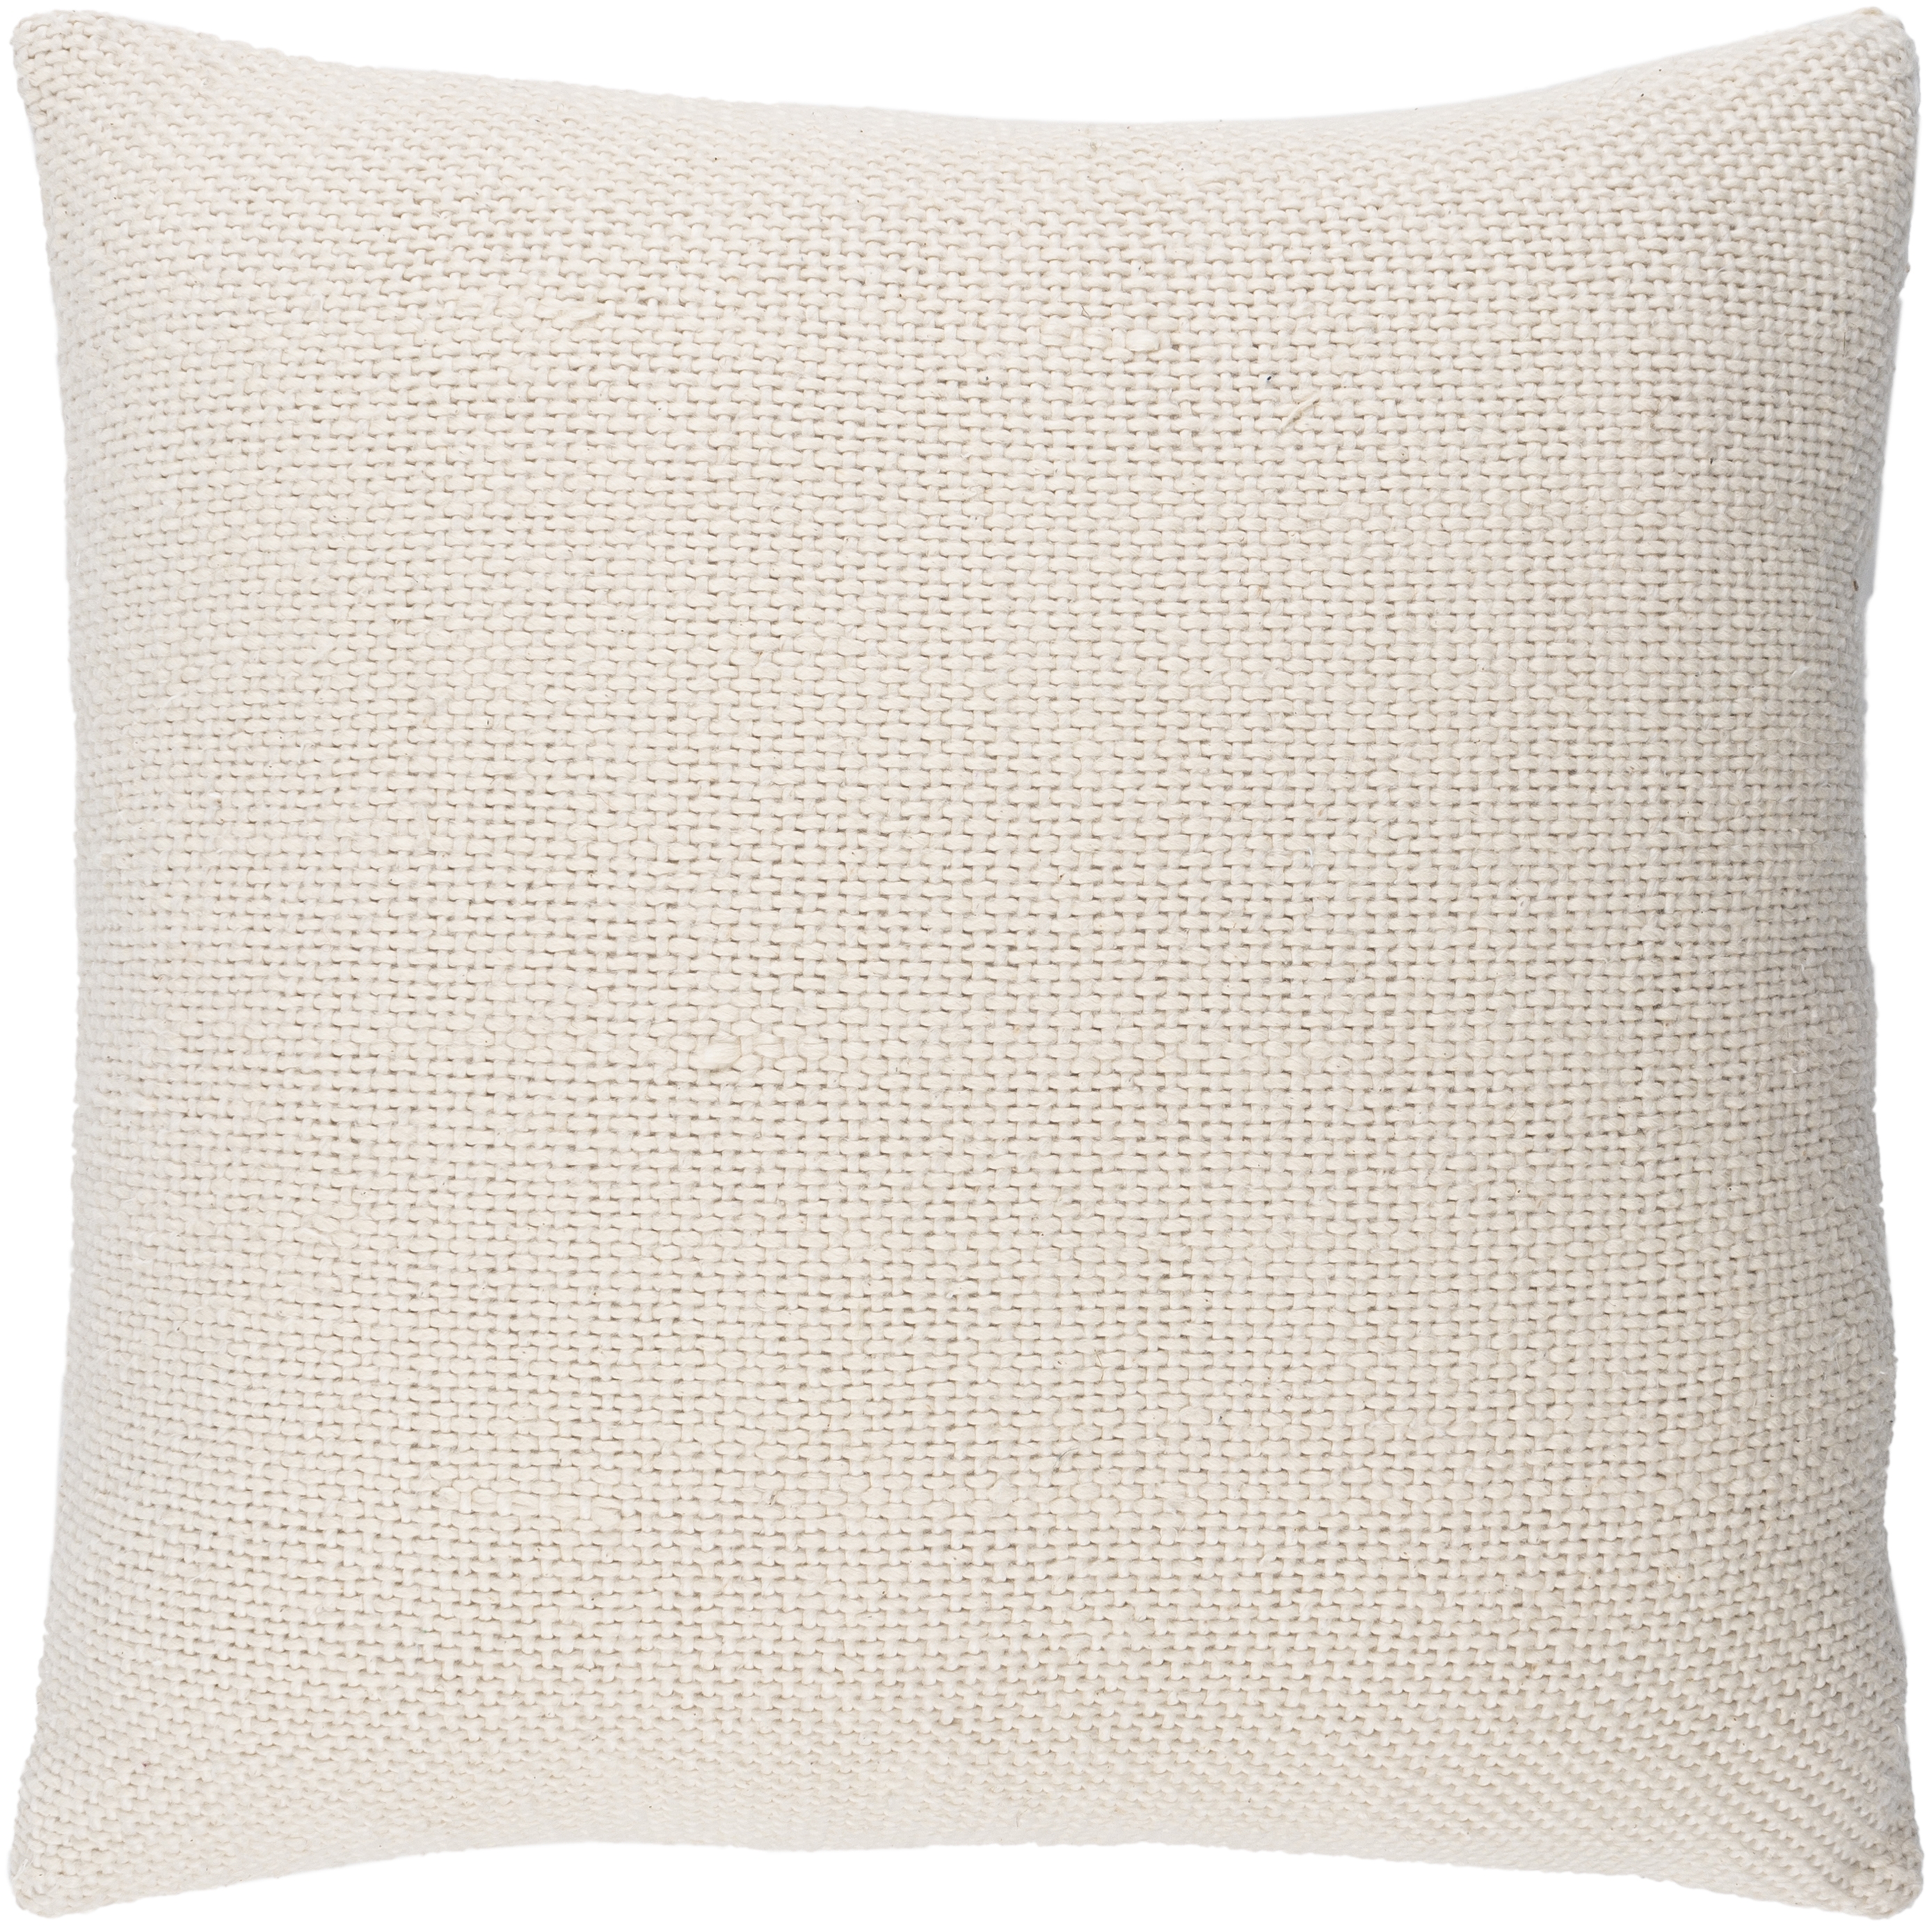 Vanessa Throw Pillow, Medium, pillow cover only - Image 0